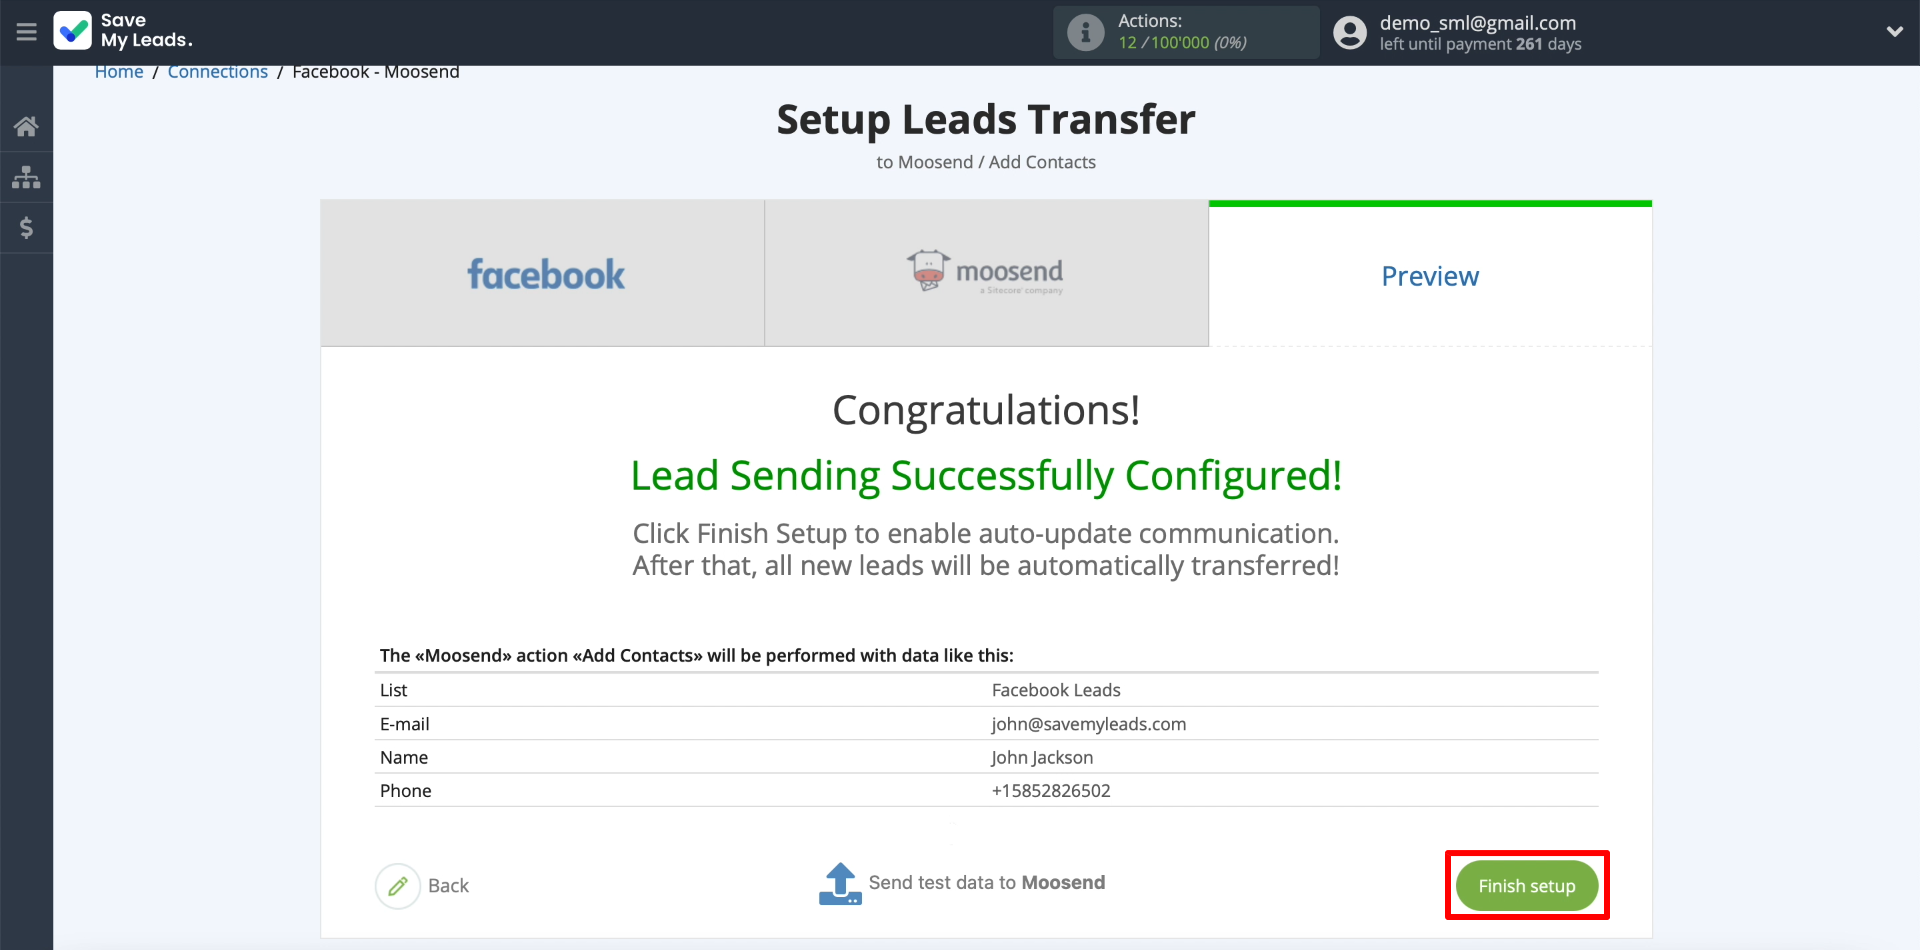 How to set up the upload of new leads from your Facebook ad account in Moosend | Finishing the integration setup